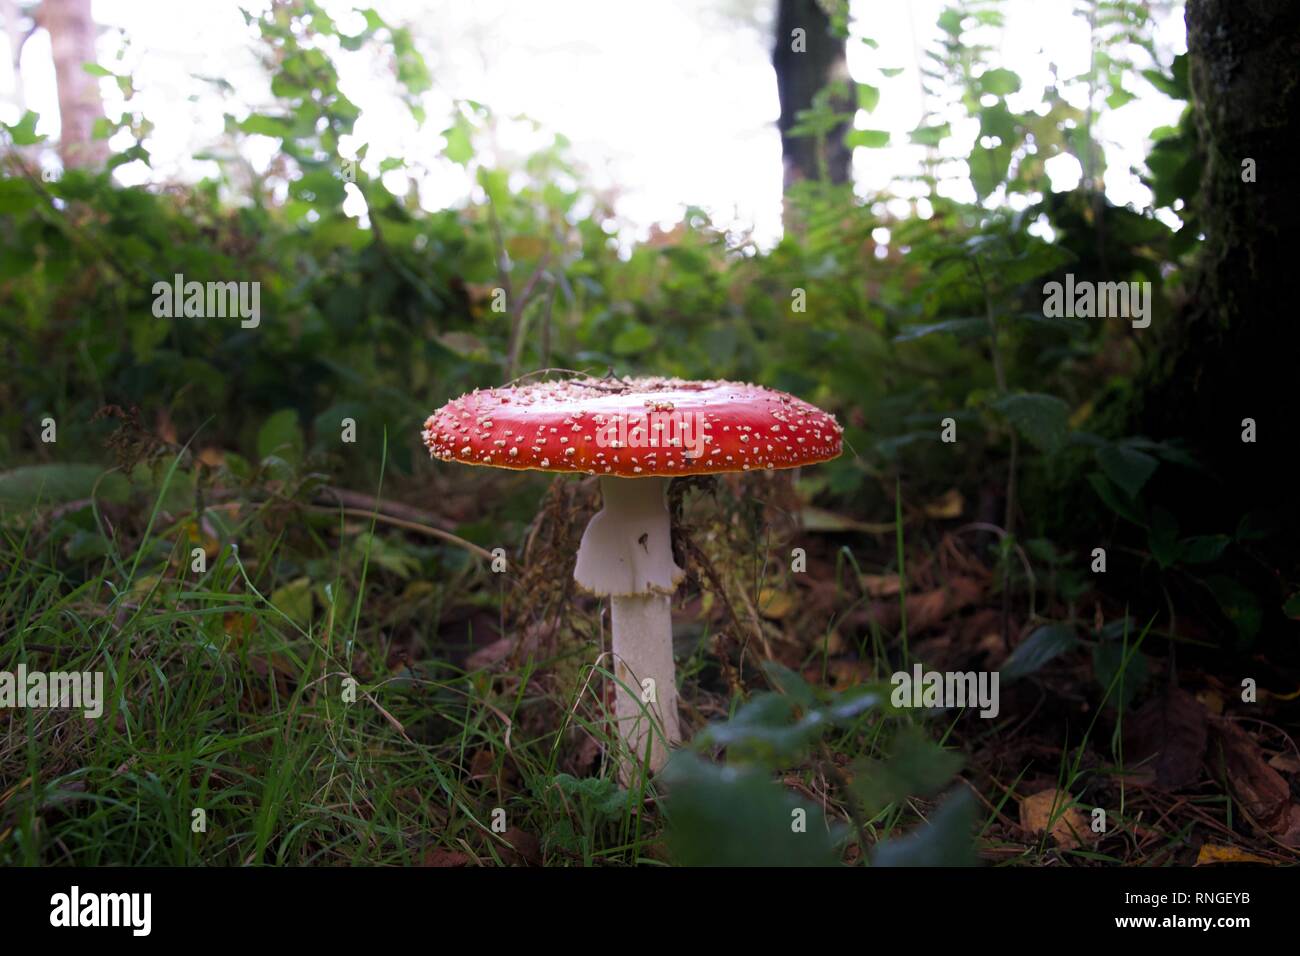 A large poisonous red and white spotted toadstool (mushroom) amongst grass and leaves on the floor of a forest or woodland Stock Photo